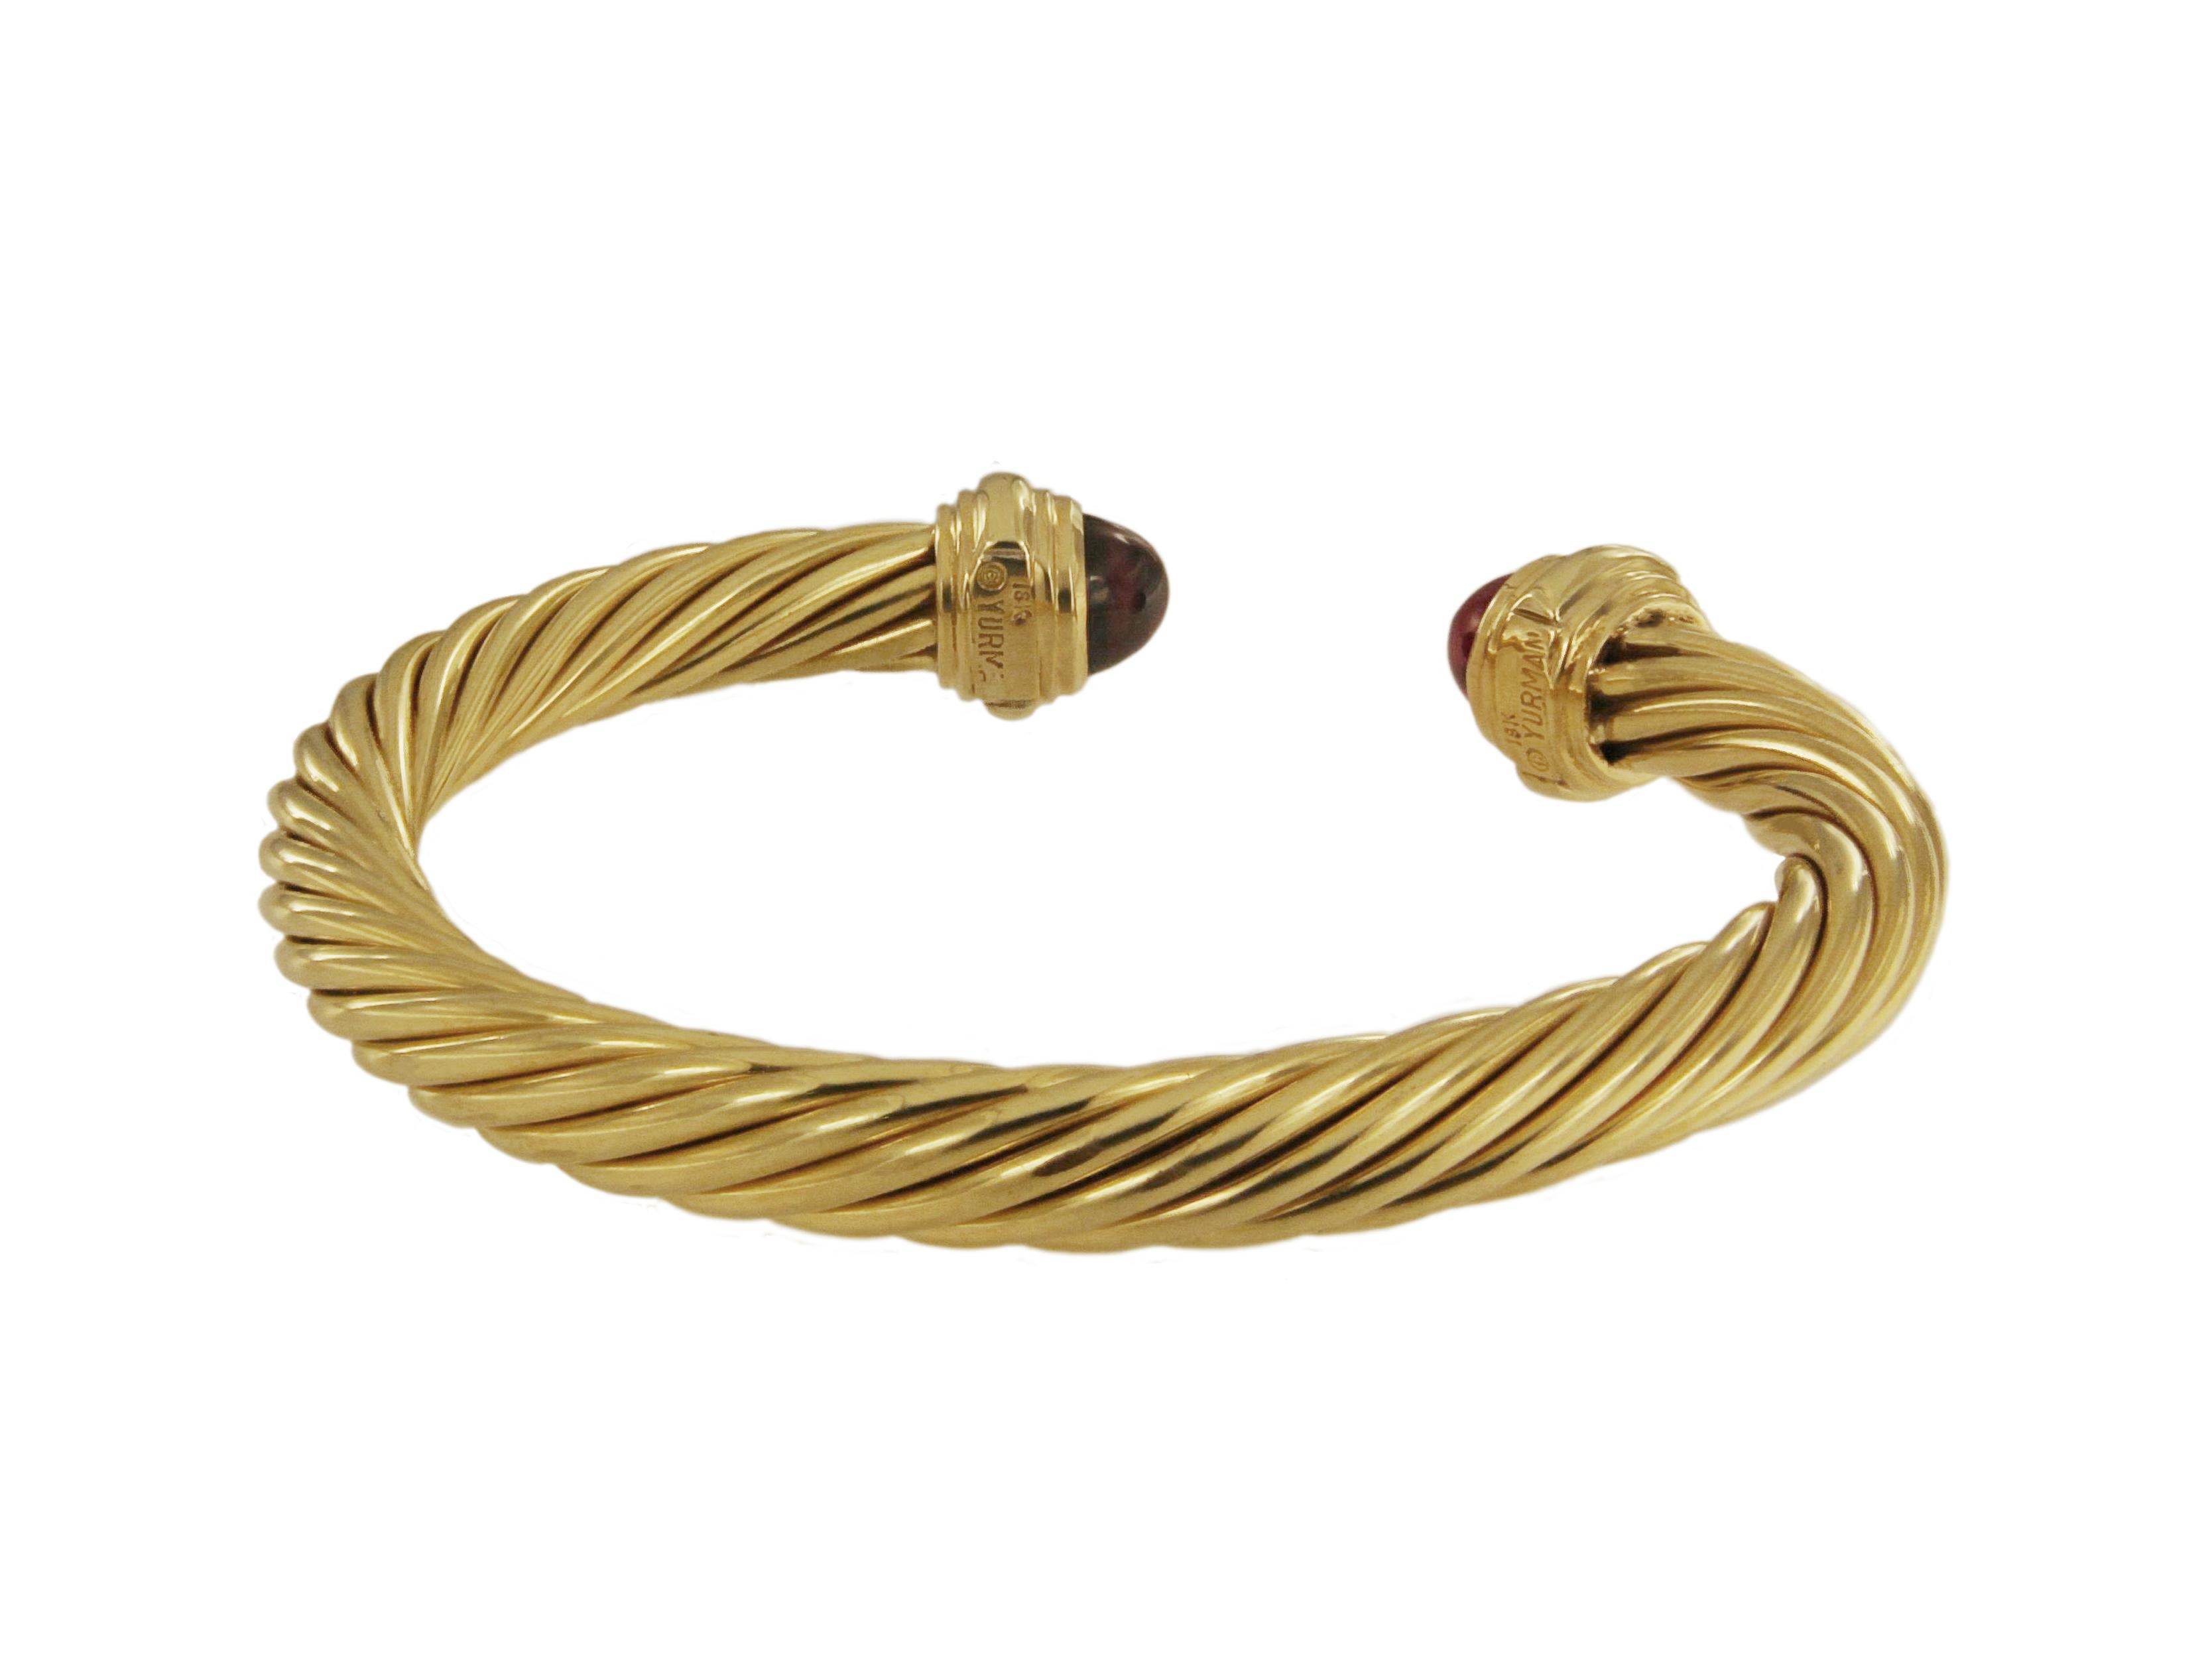 -Mint condition

-18k Yellow Gold

-Garnet faceted

-Cable, 7mm wide

-Weight: 26gr

-Size: Medium

-David Yurman box included.